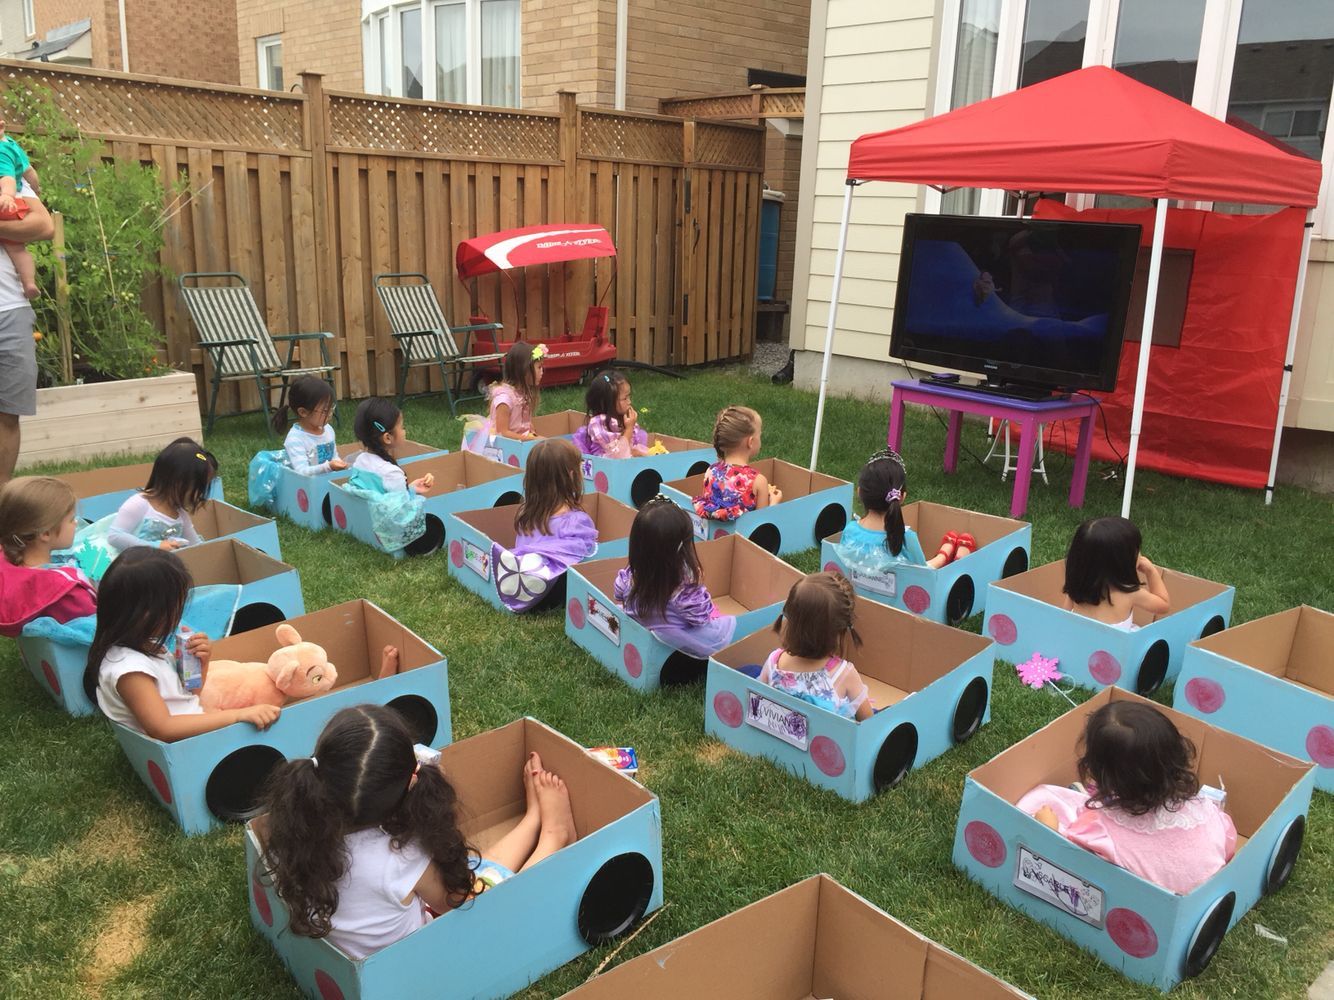 Leahs Drive-in movie birthday party.  Its daylight so a projector screen probably wouldnt work so we lugged a TV outside.